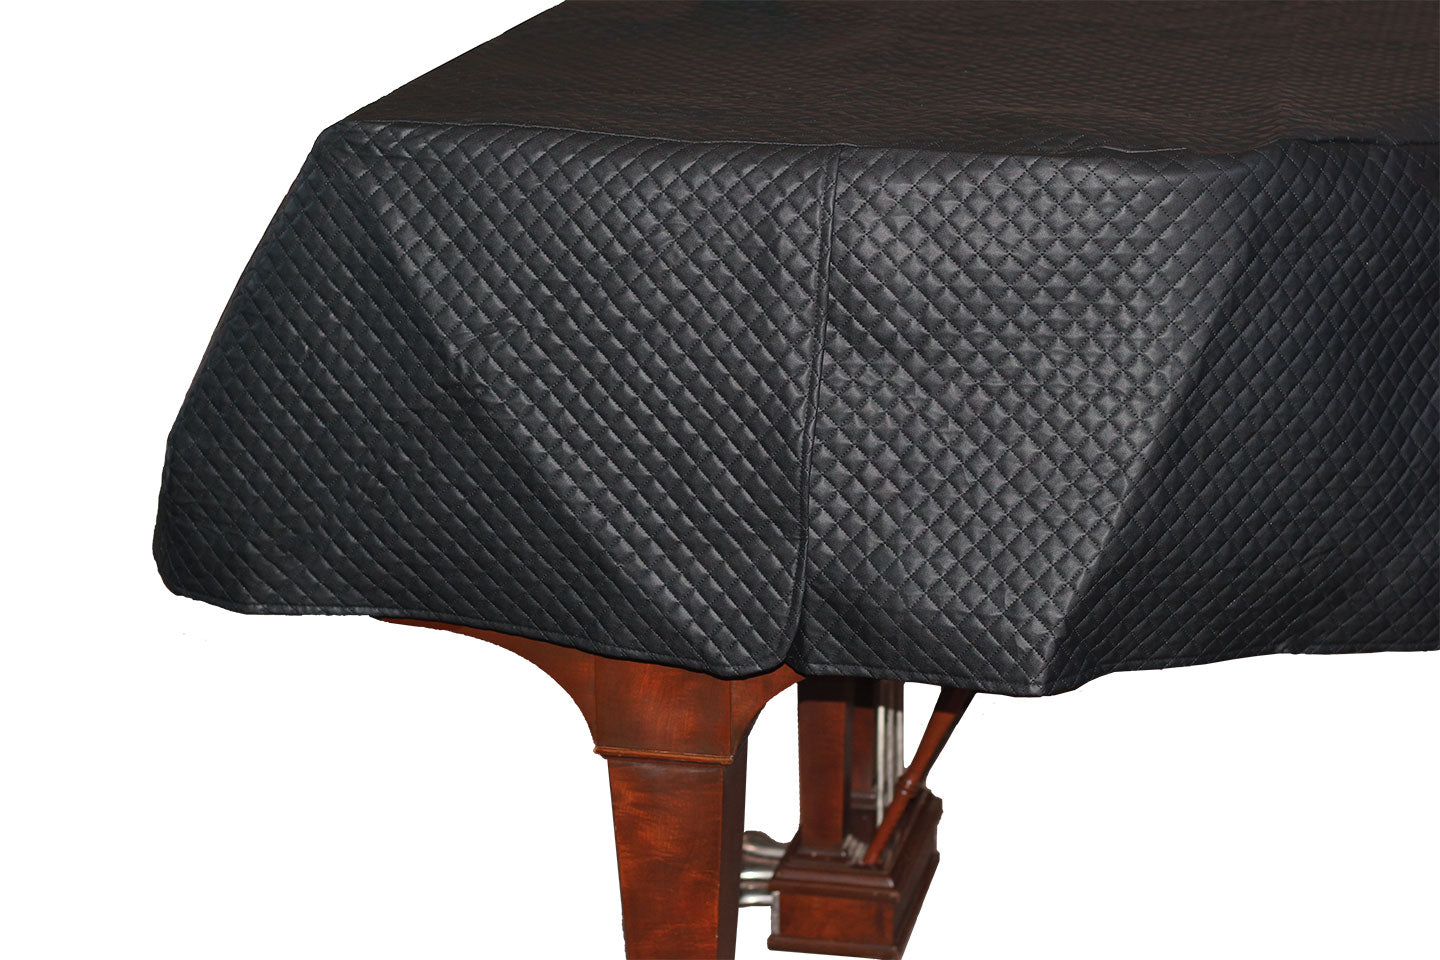 Quilted Vinyl Piano Cover - Yamaha C1 and C2